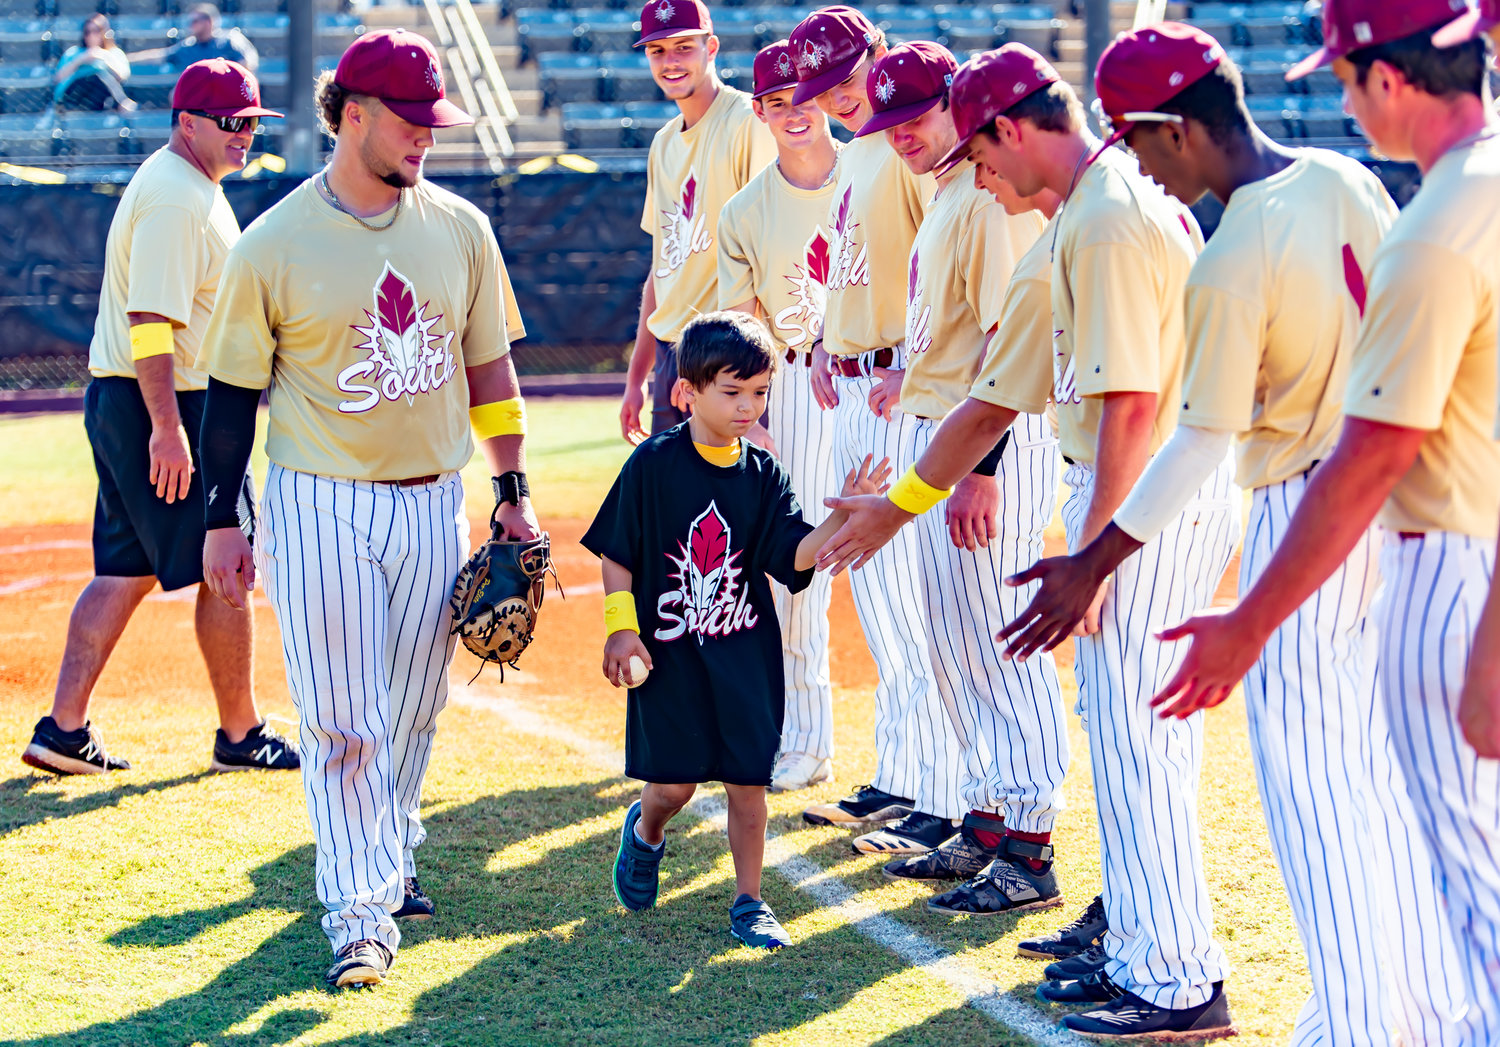 Cullen McKinney was introduced along with the Coastal Alabama Sun Chief baseball team at the first-ever “Go Gold” Fall Tournament where all proceeds went directly to Baldwin County-based Berry Strong Foundation, which provides support for Childhood Cancer research.